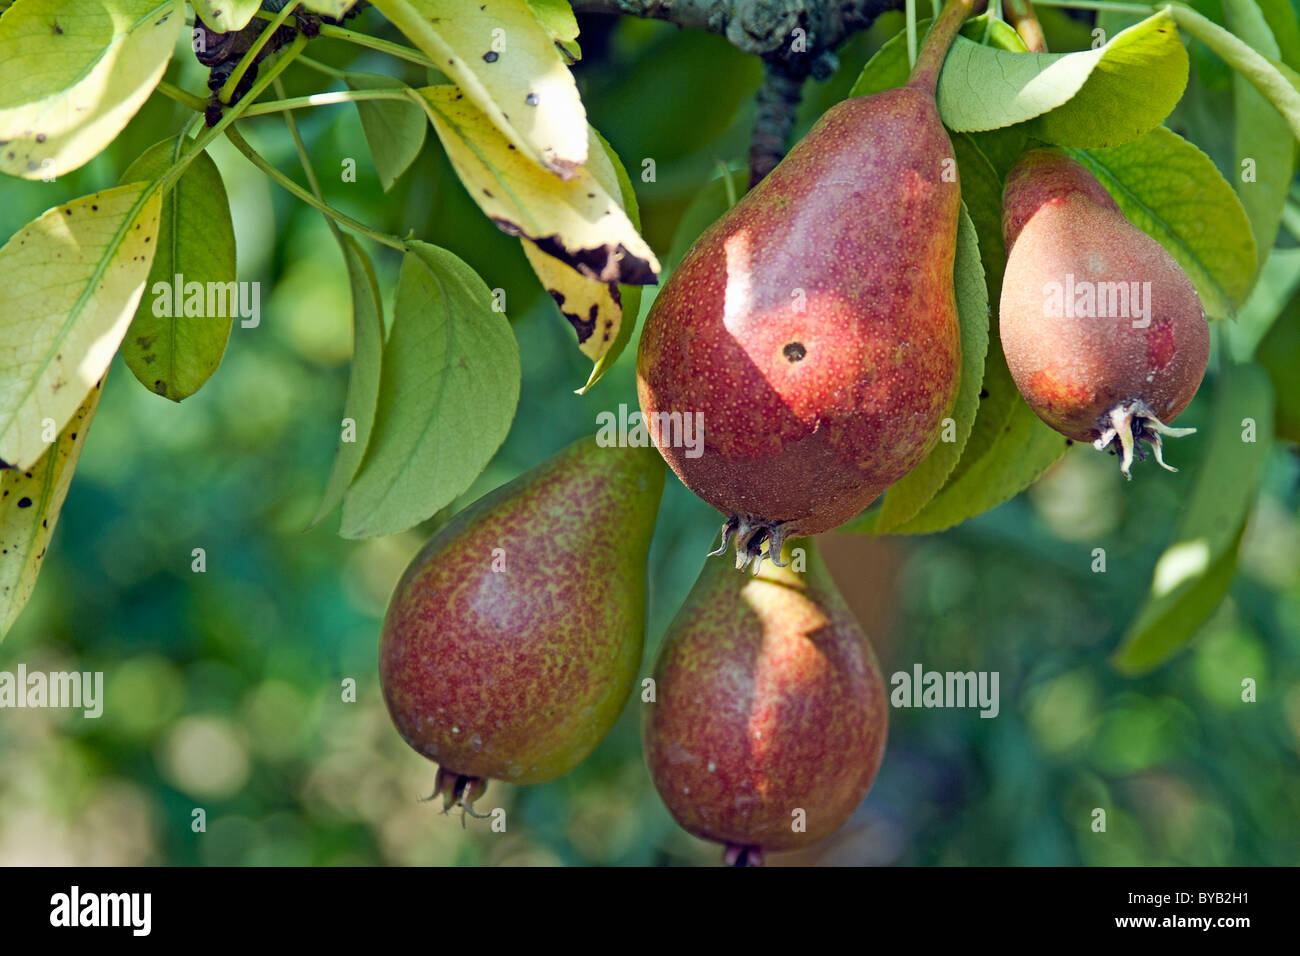 Pears growing on a tree. Stock Photo